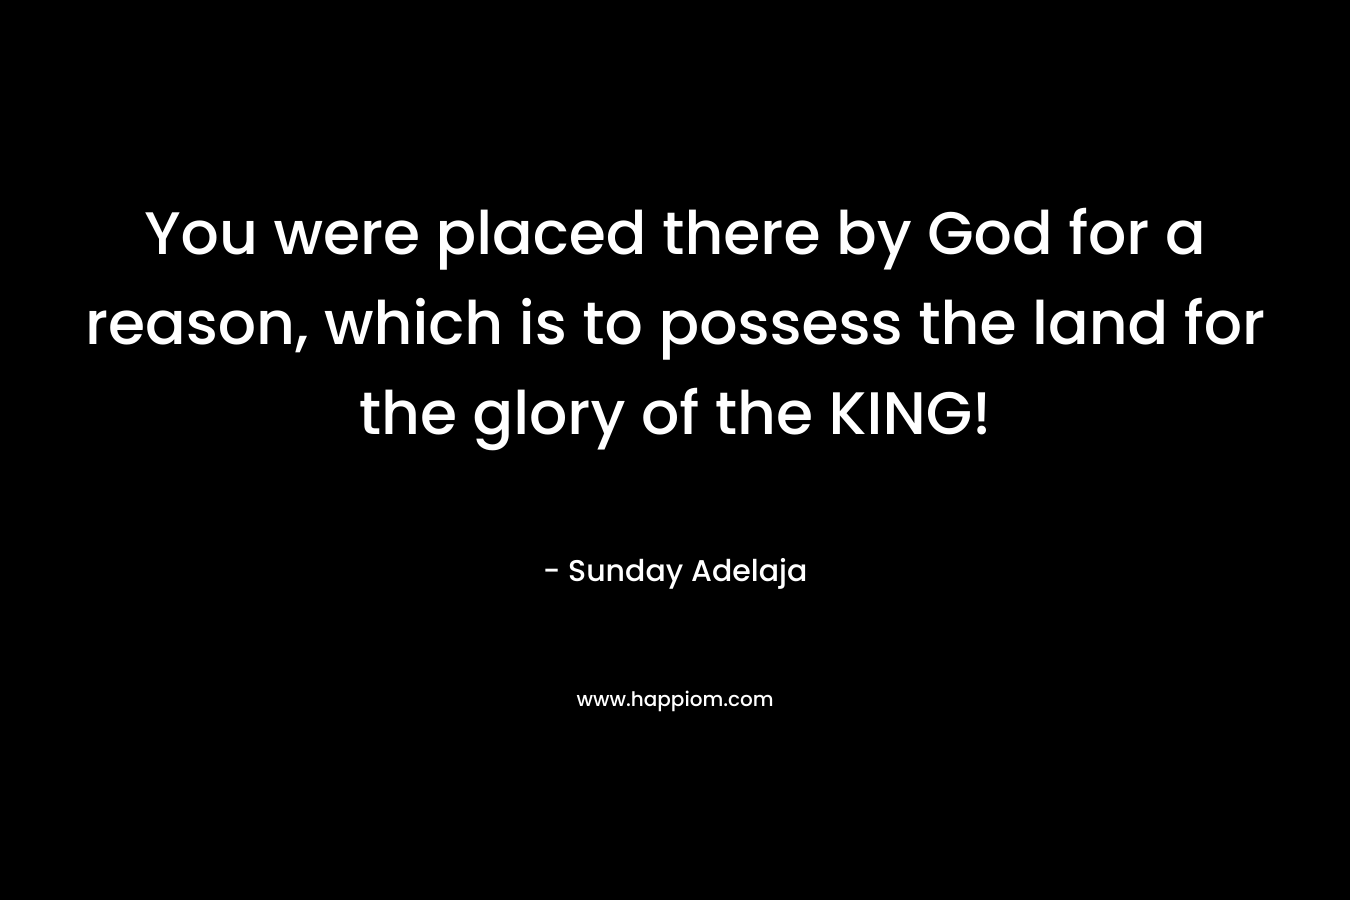 You were placed there by God for a reason, which is to possess the land for the glory of the KING!